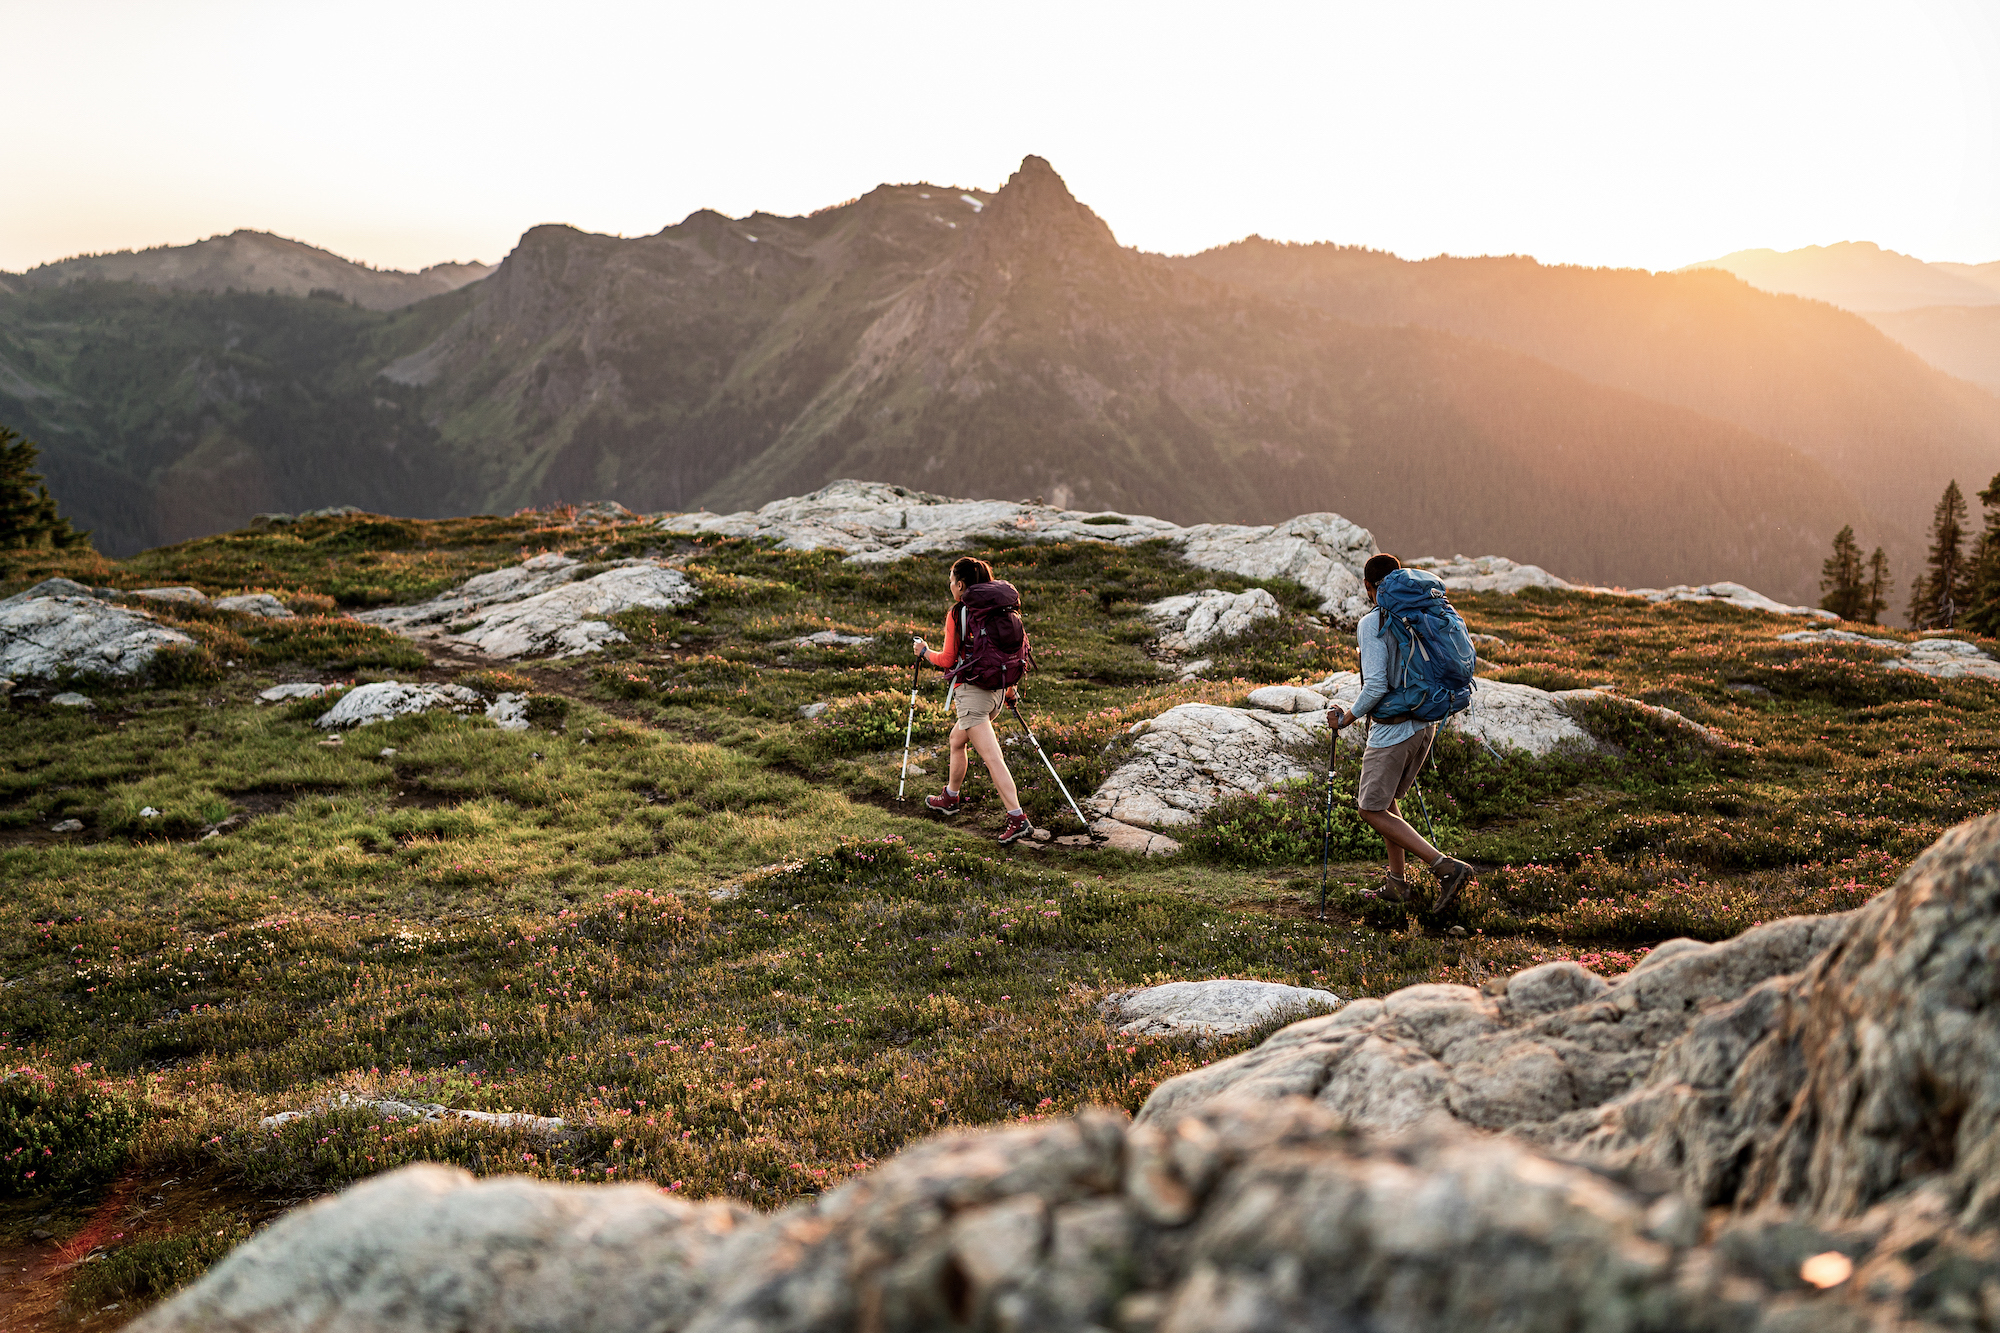 Hikers on the beautiful trail in the evening with mountains in the background